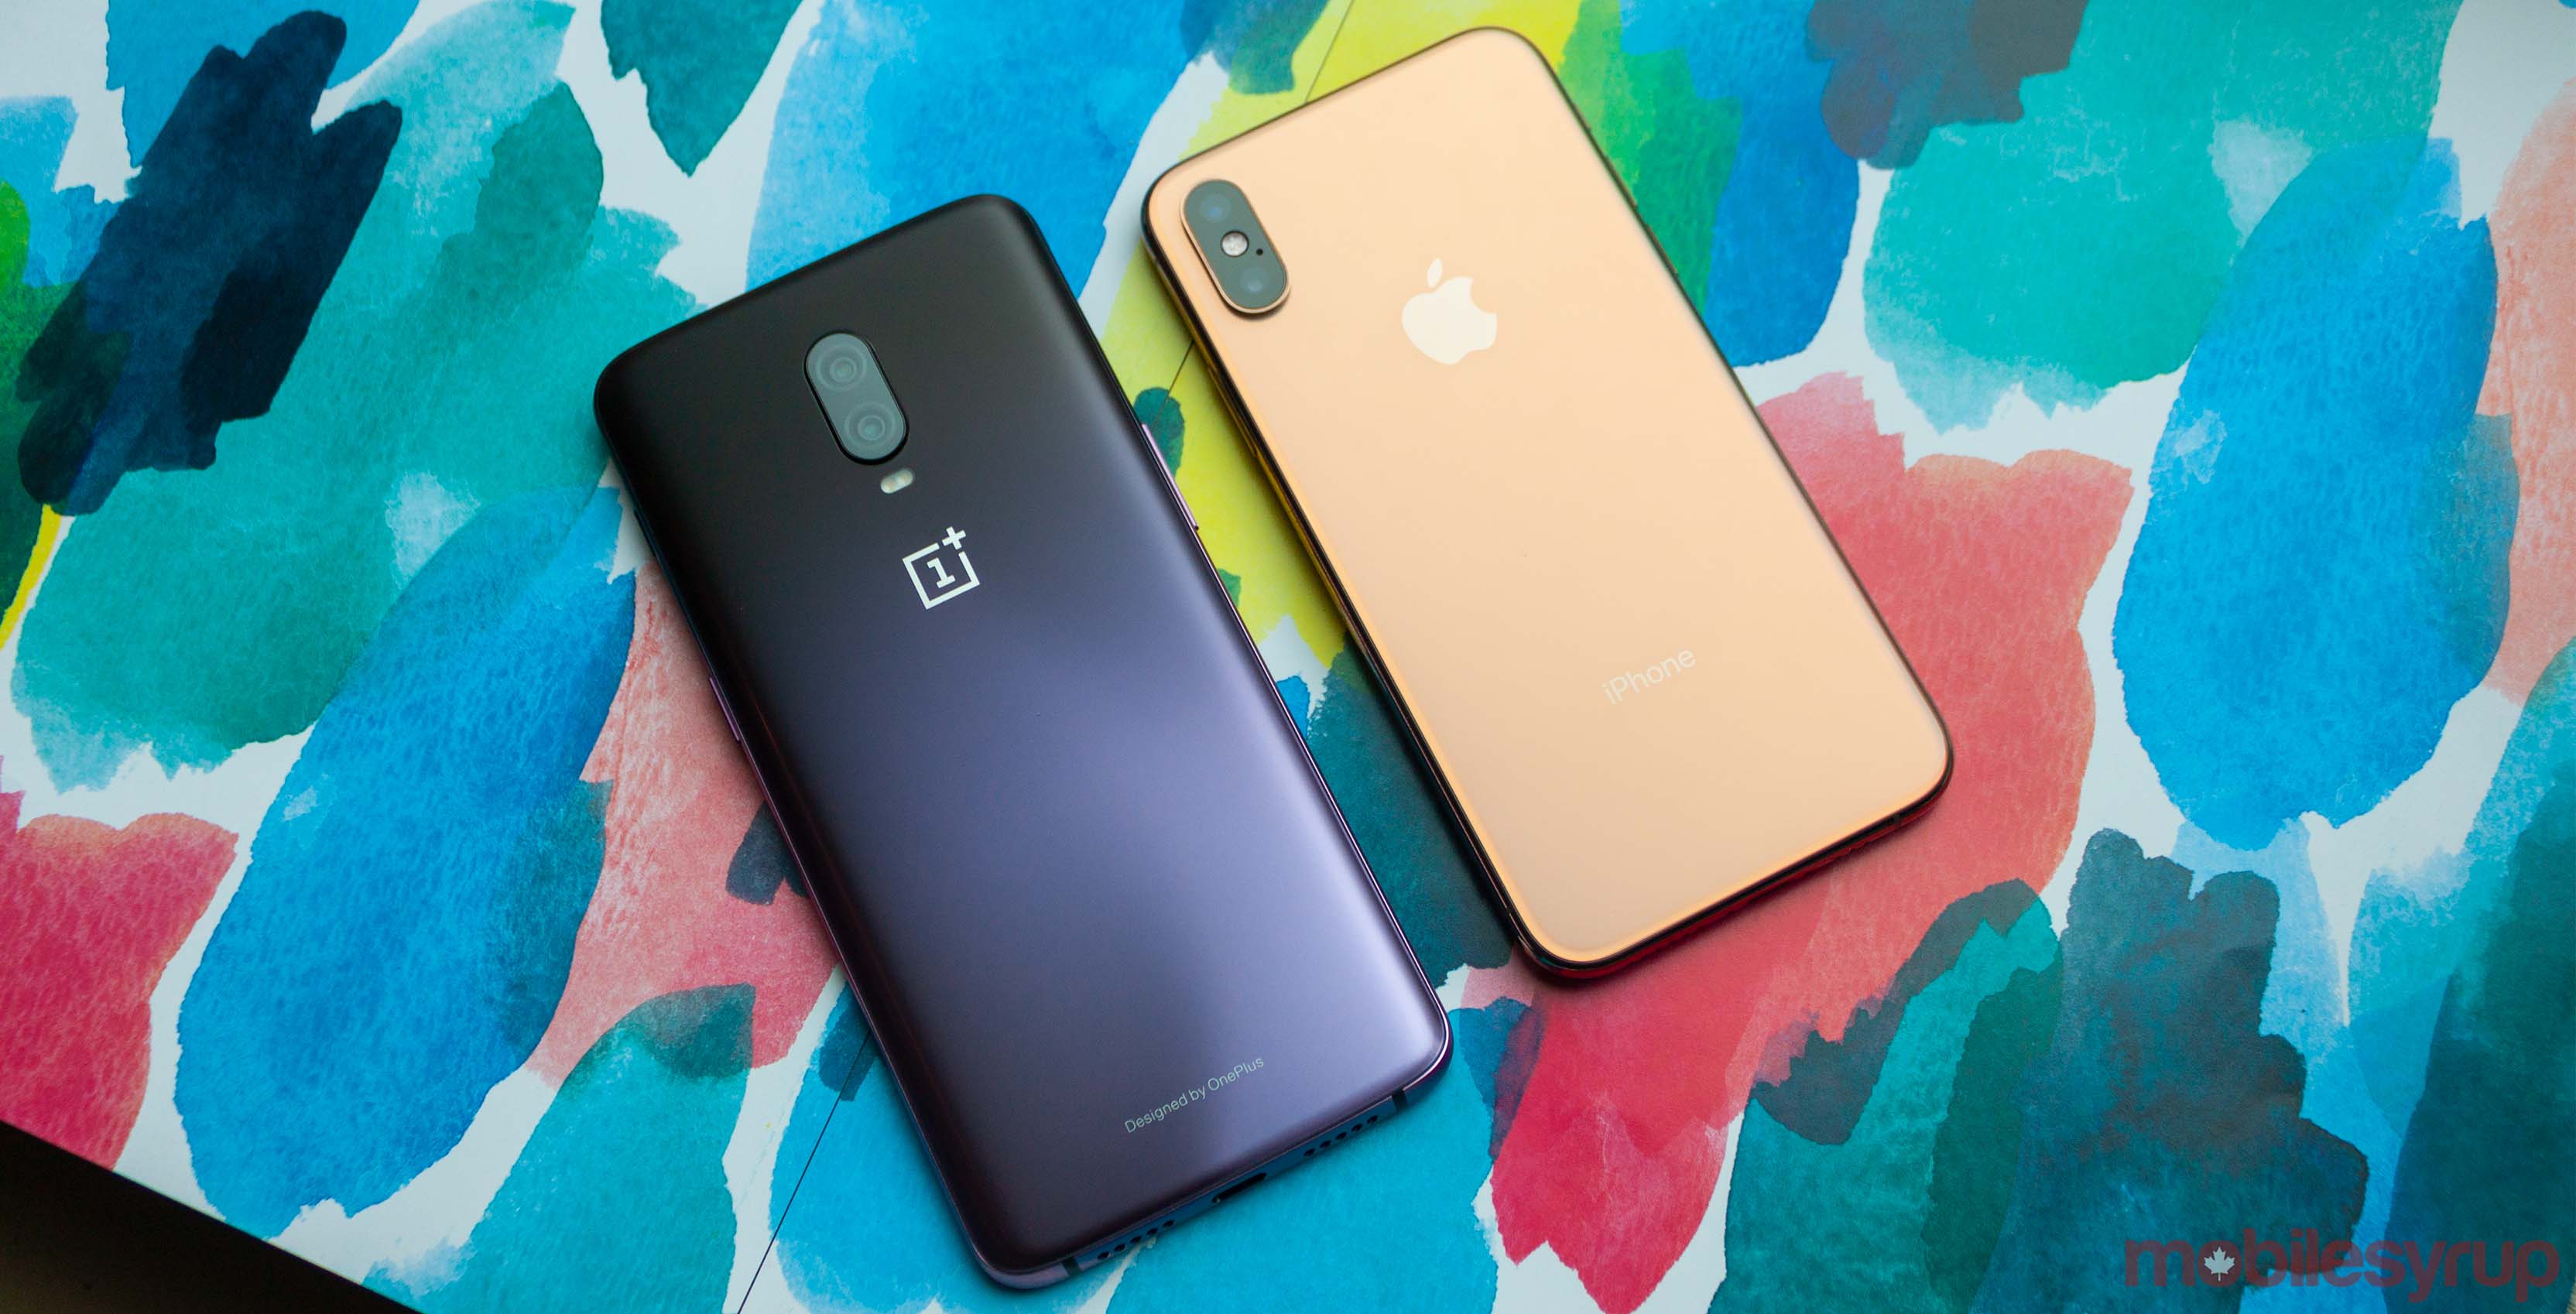 iPhoen XS and OnePlus 6T